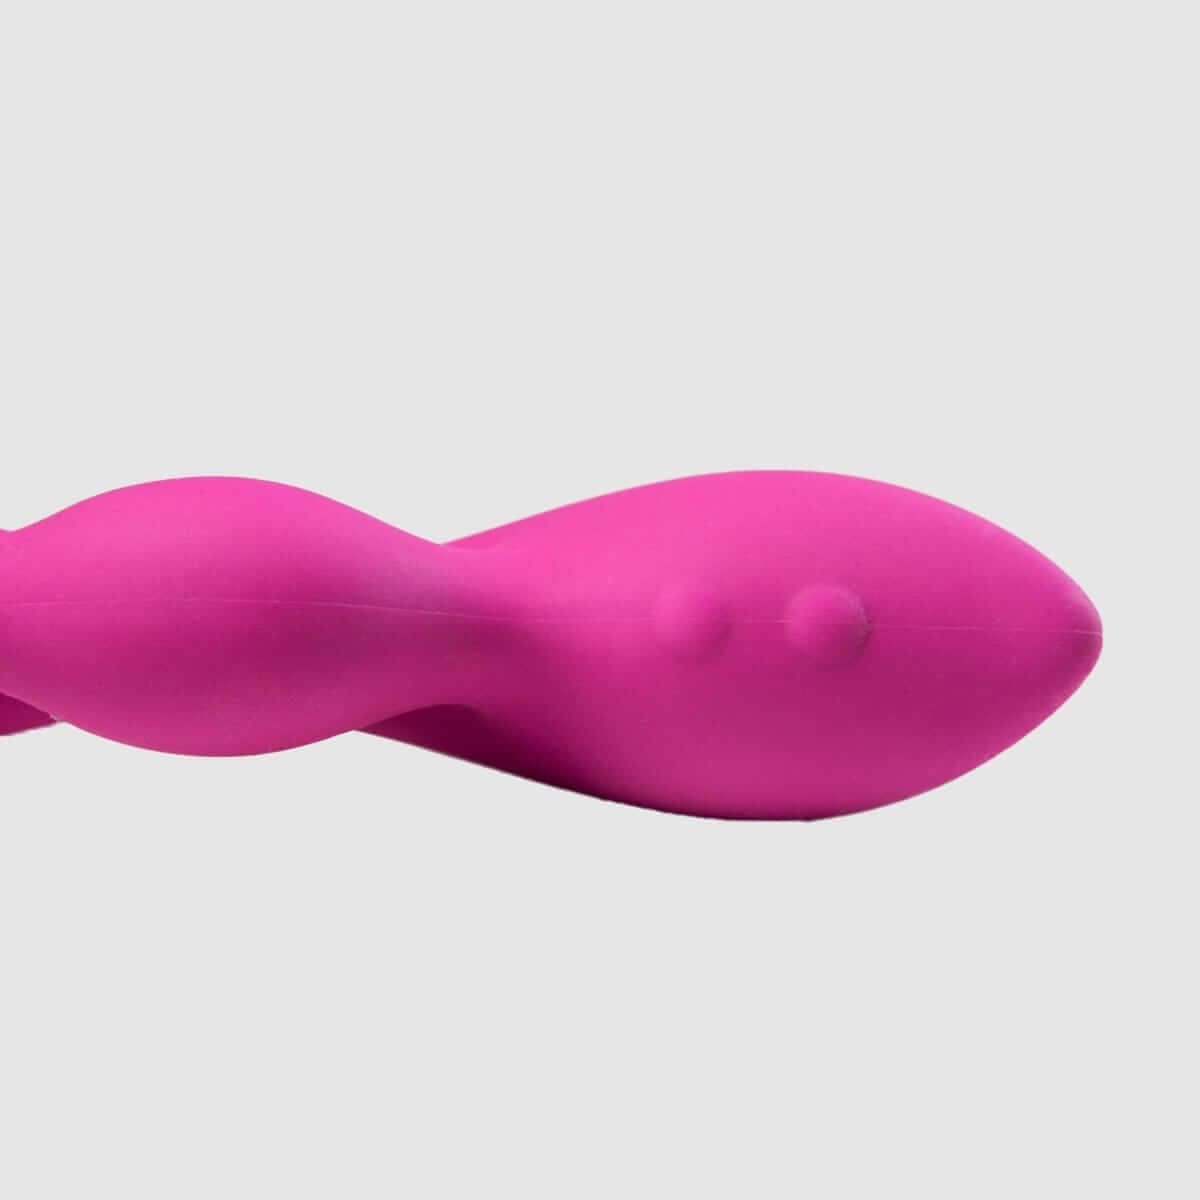 The Cygnet Swan - Thorn & Feather Sex Toy Canada